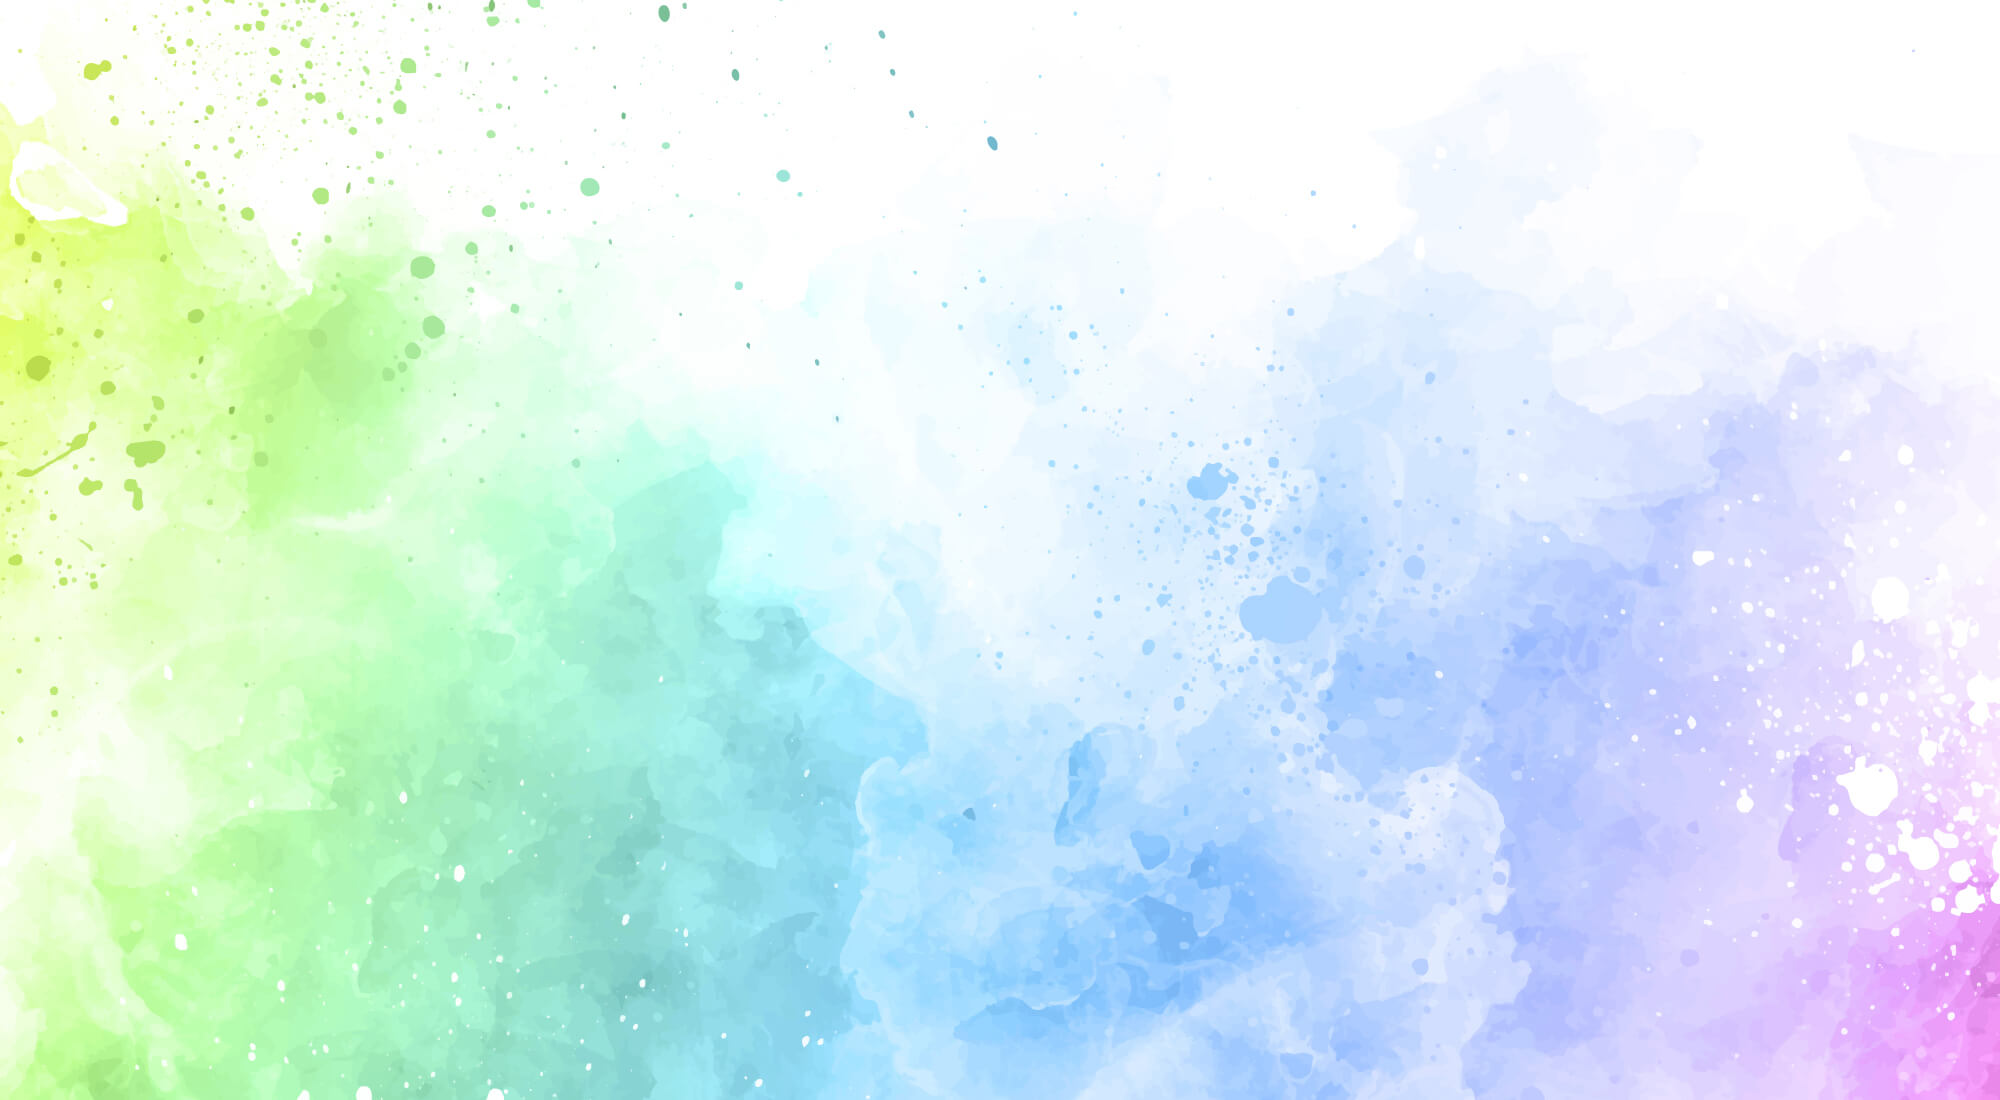 Hand painted watercolor abstract background images